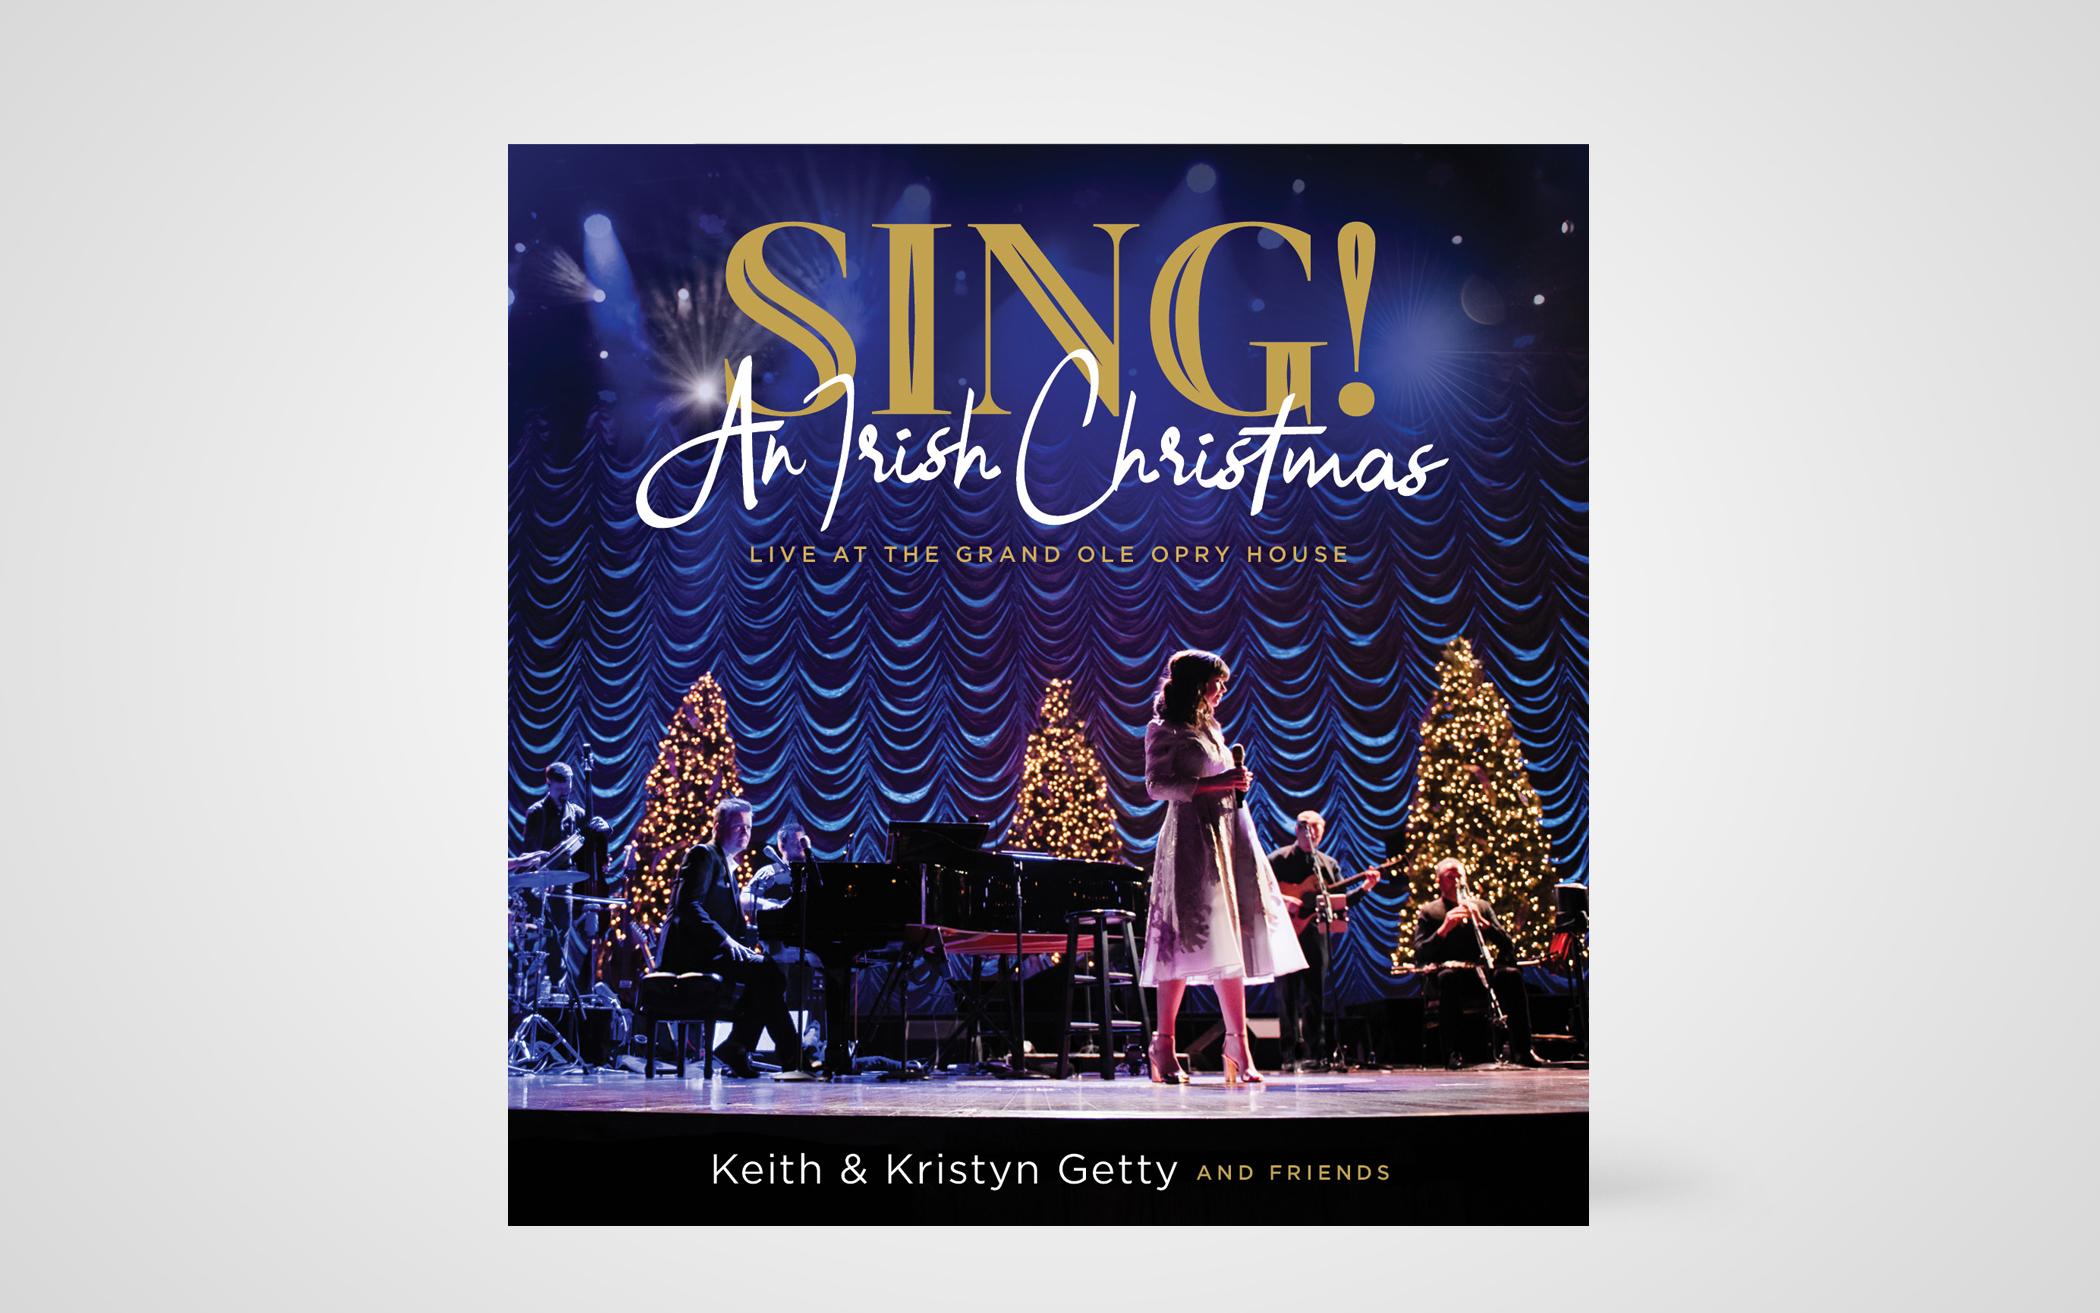 Sing! An Irish Christmas – Live at the Grand Ole Opry House 